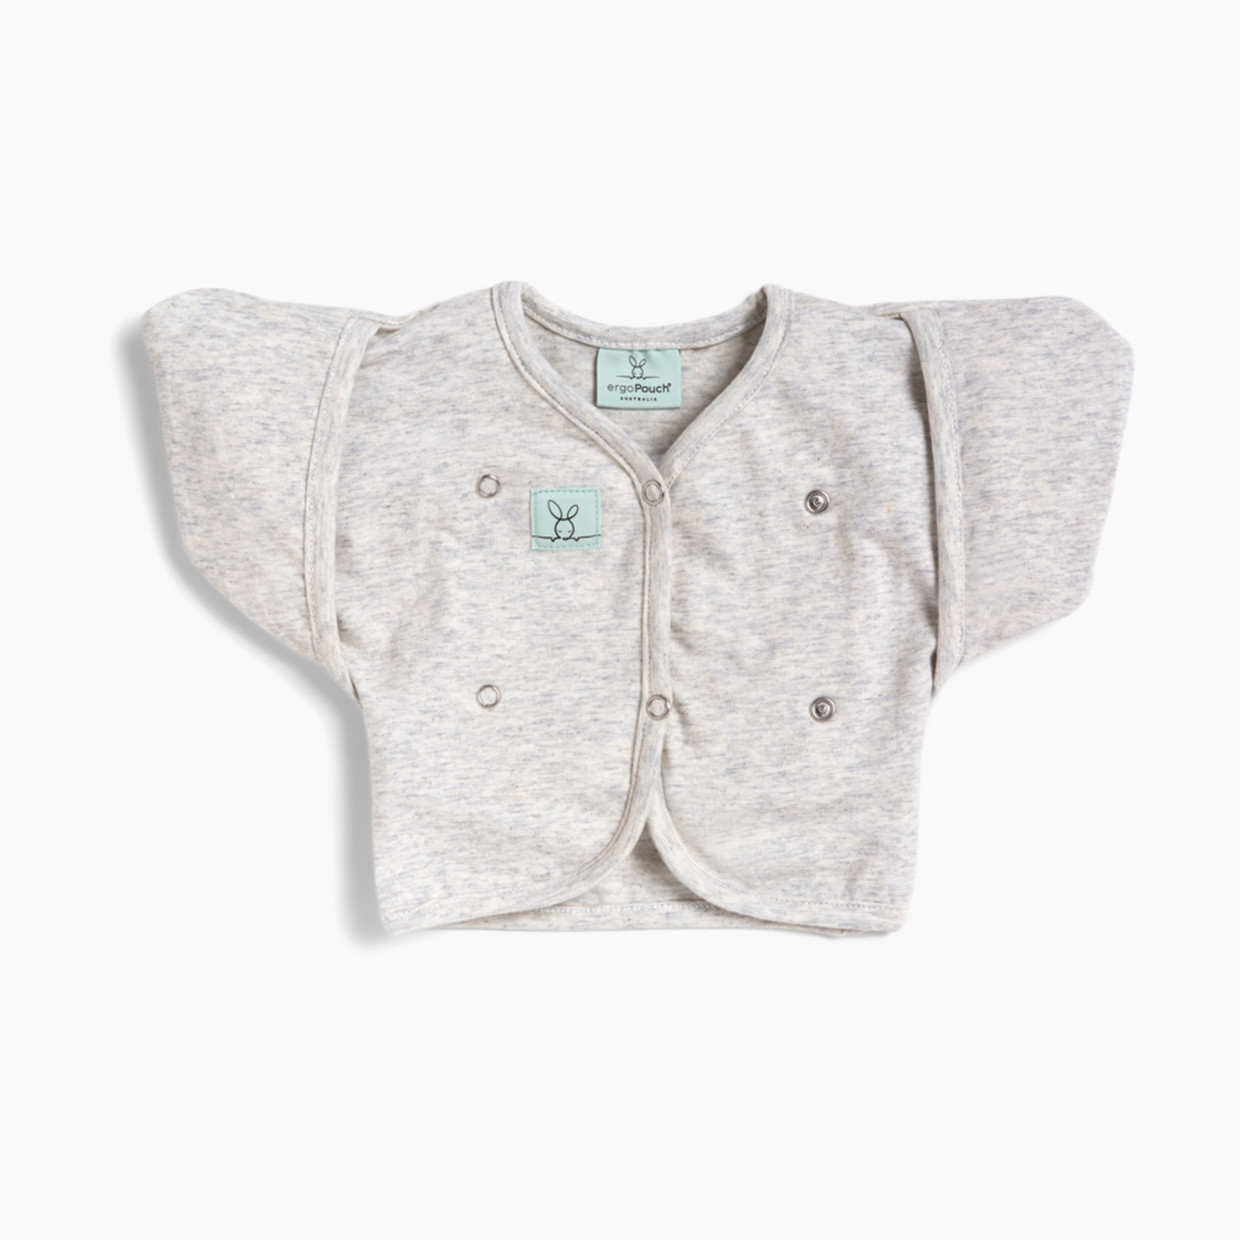 ergoPouch Butterfly Cardi 0.2 TOG - Grey Marle, 2-6 Months.